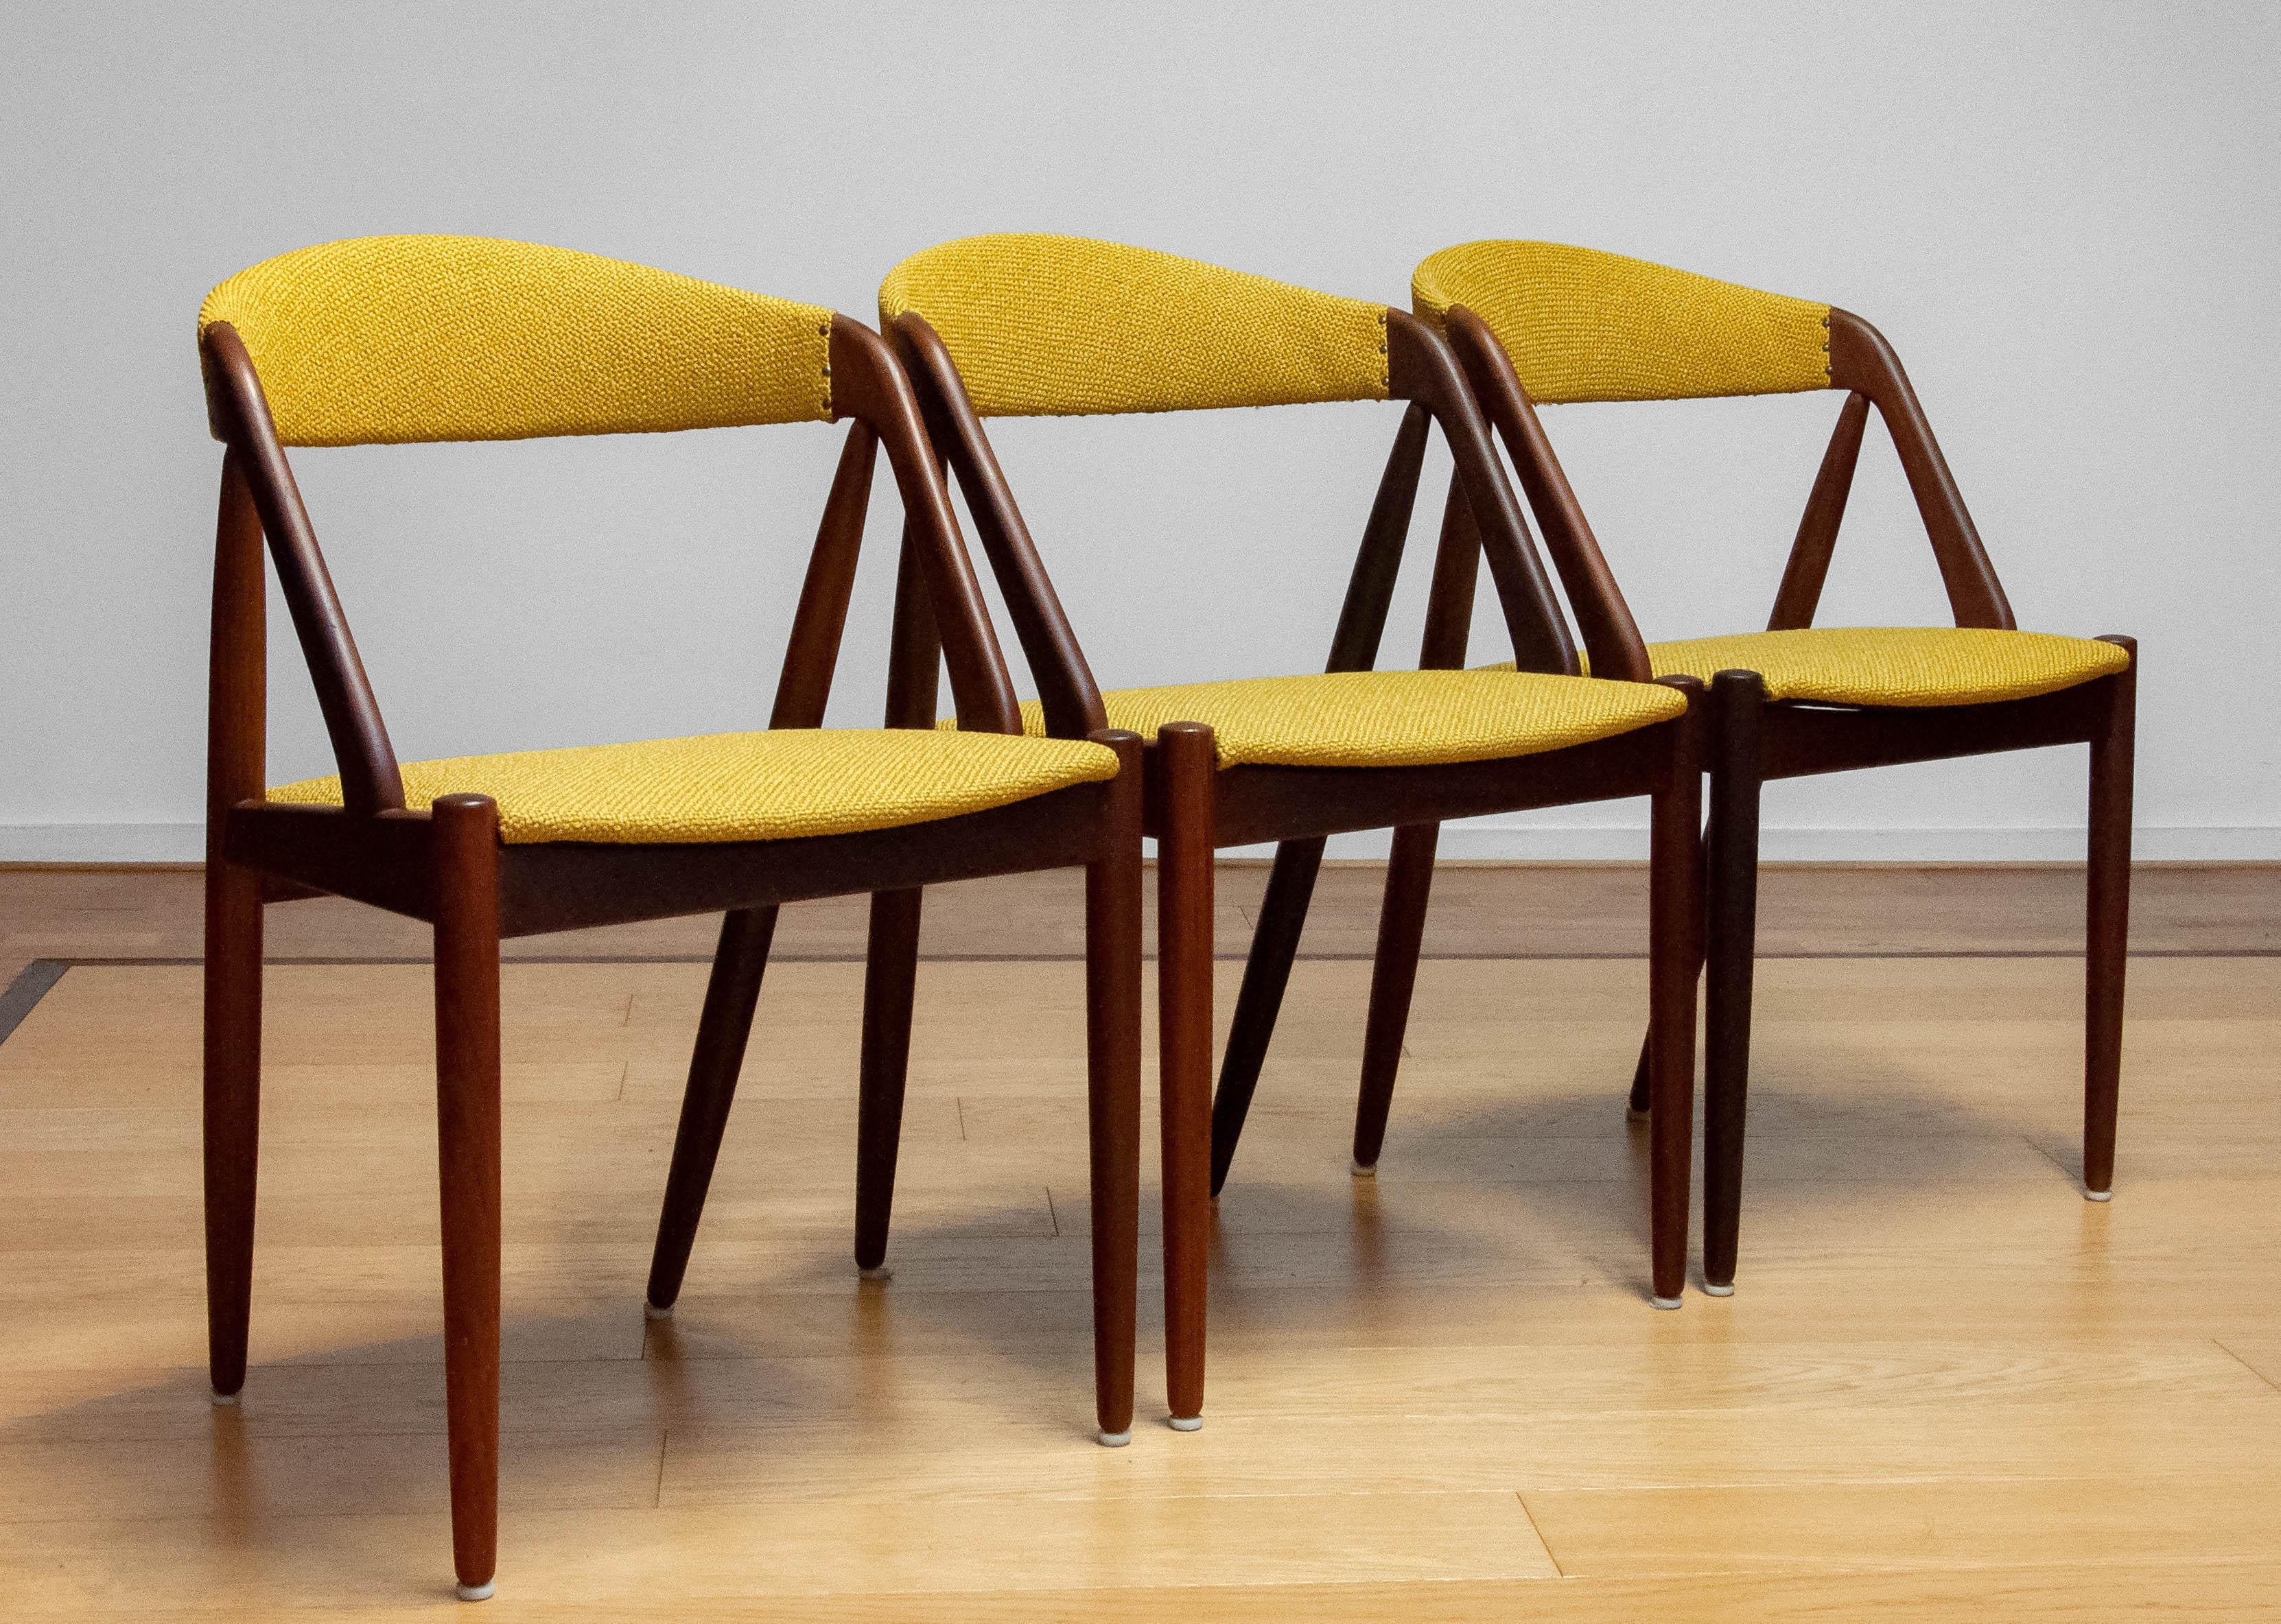 Beautiful dining chair designed by Kai Kristiansen for Shou-Andersen Møbelfabrik in Denmark 1960s.
The chairs are reupholstered in our workshop with the current yellow ochre fabric. The frames are teak and the chairs are in Wonderfull